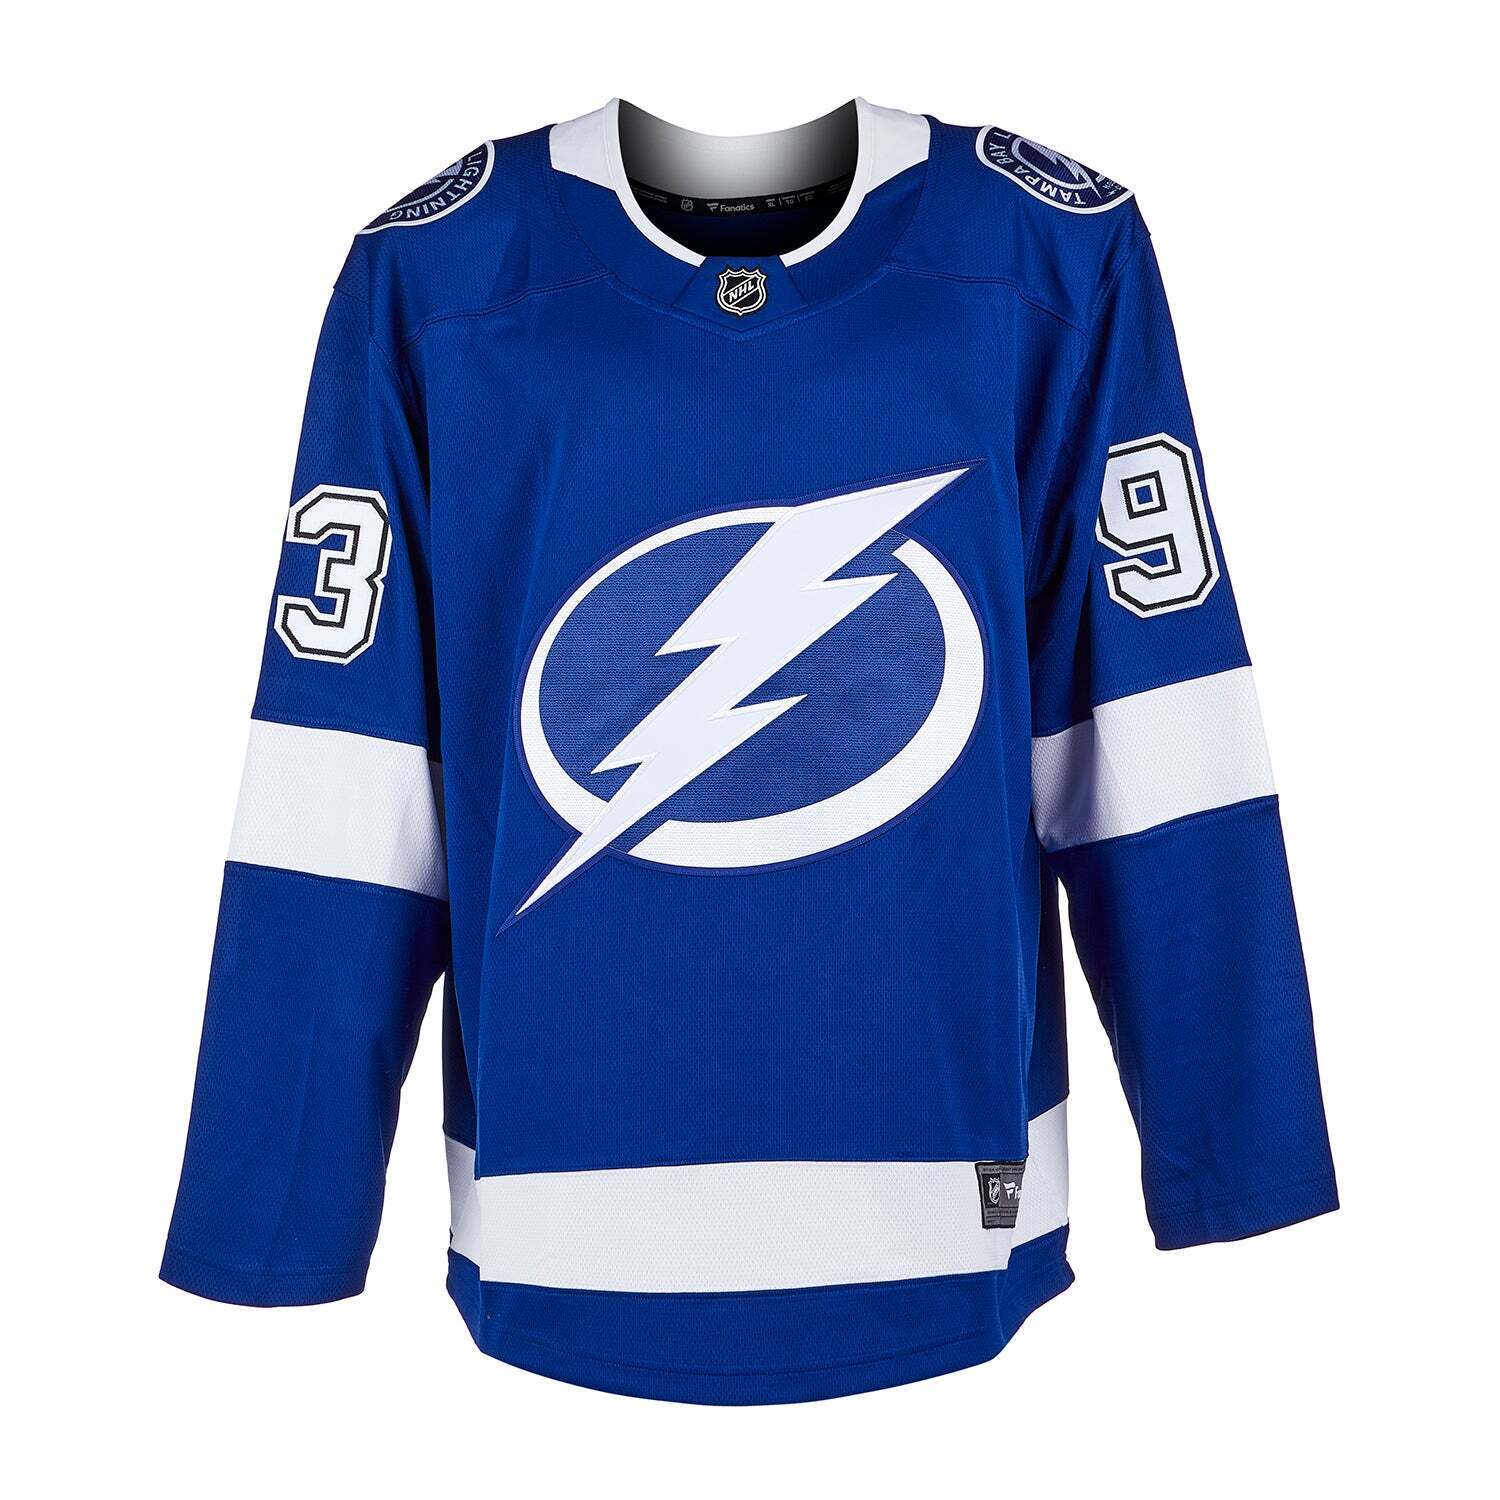 Pat Maroon signed jersey autographed Tampa Bay Lightning JSA COA –  CollectibleXchange